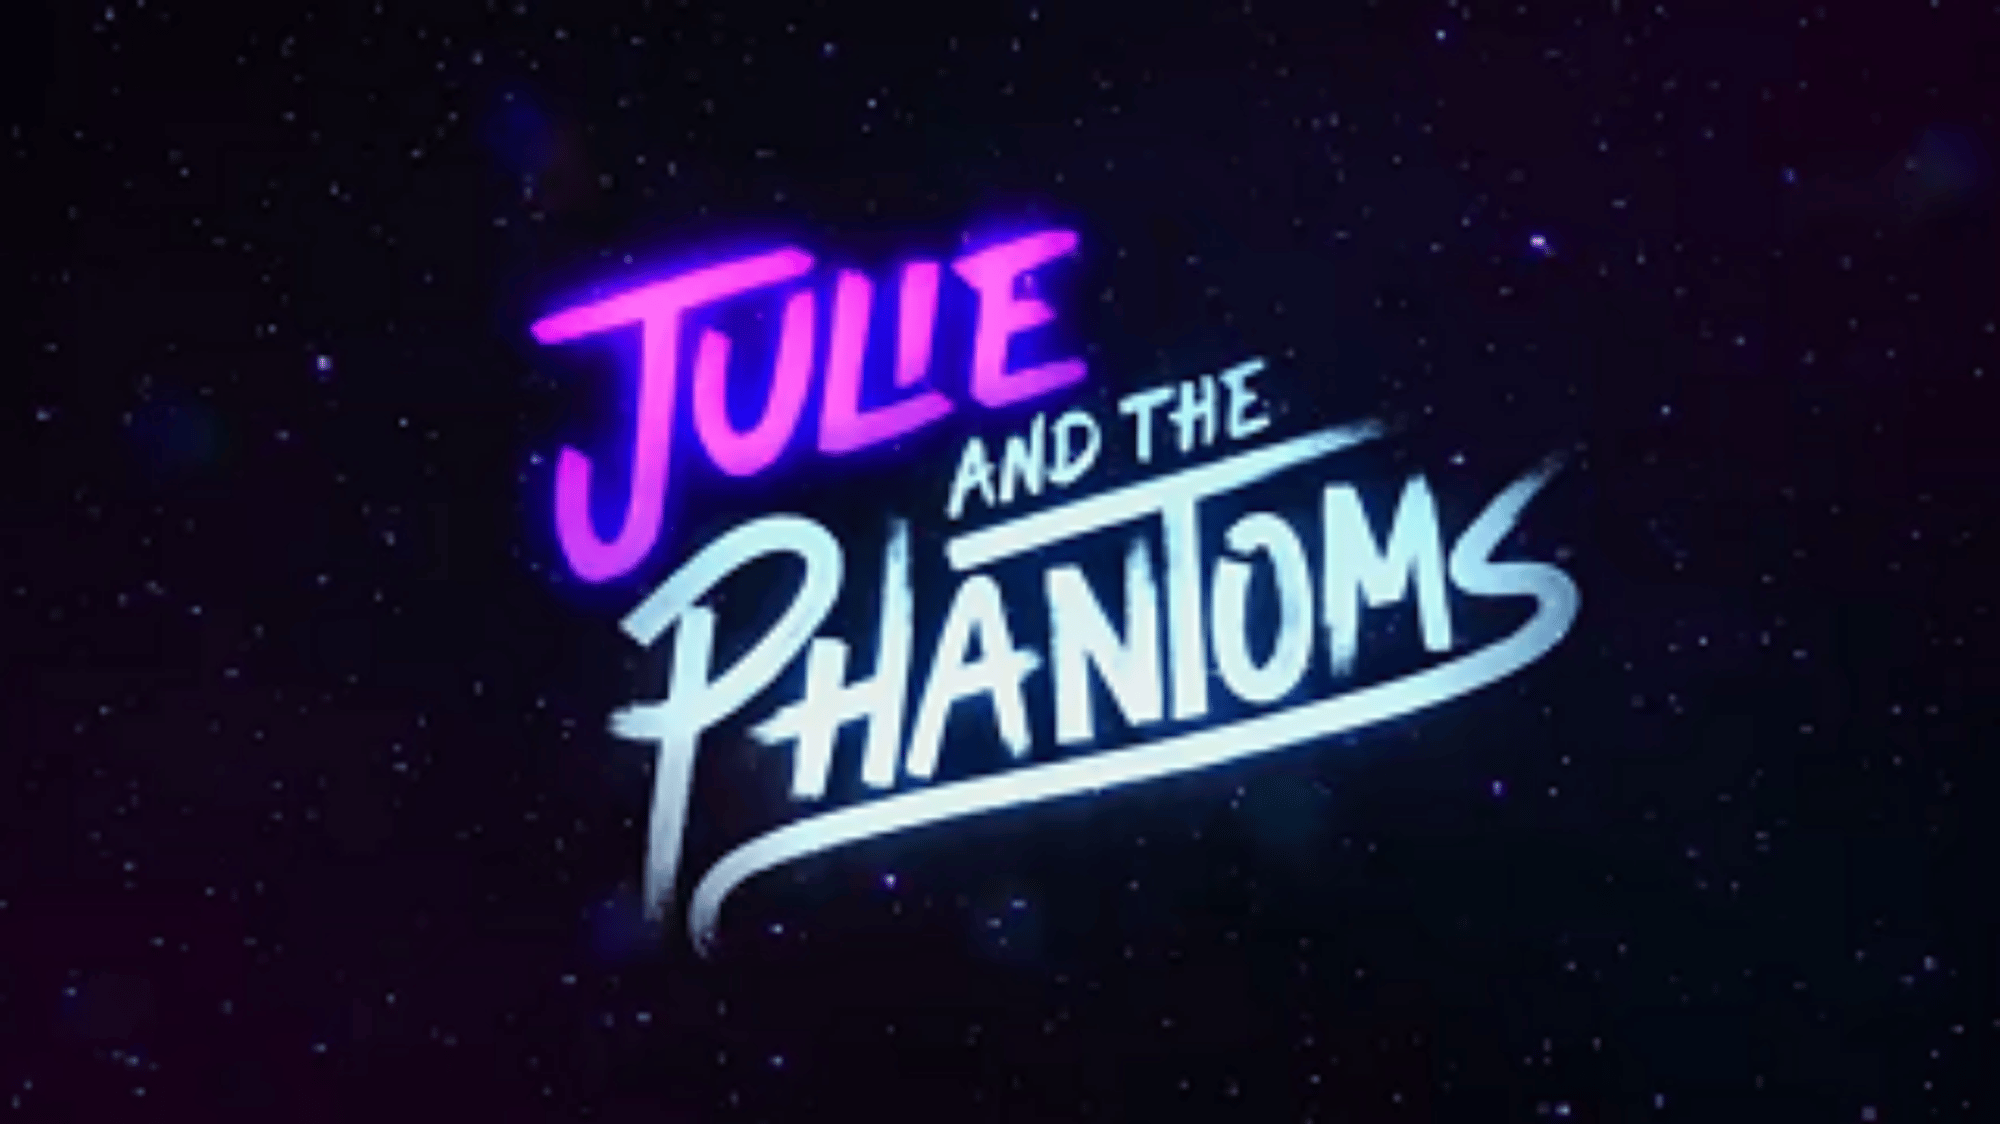 julie and the phantoms